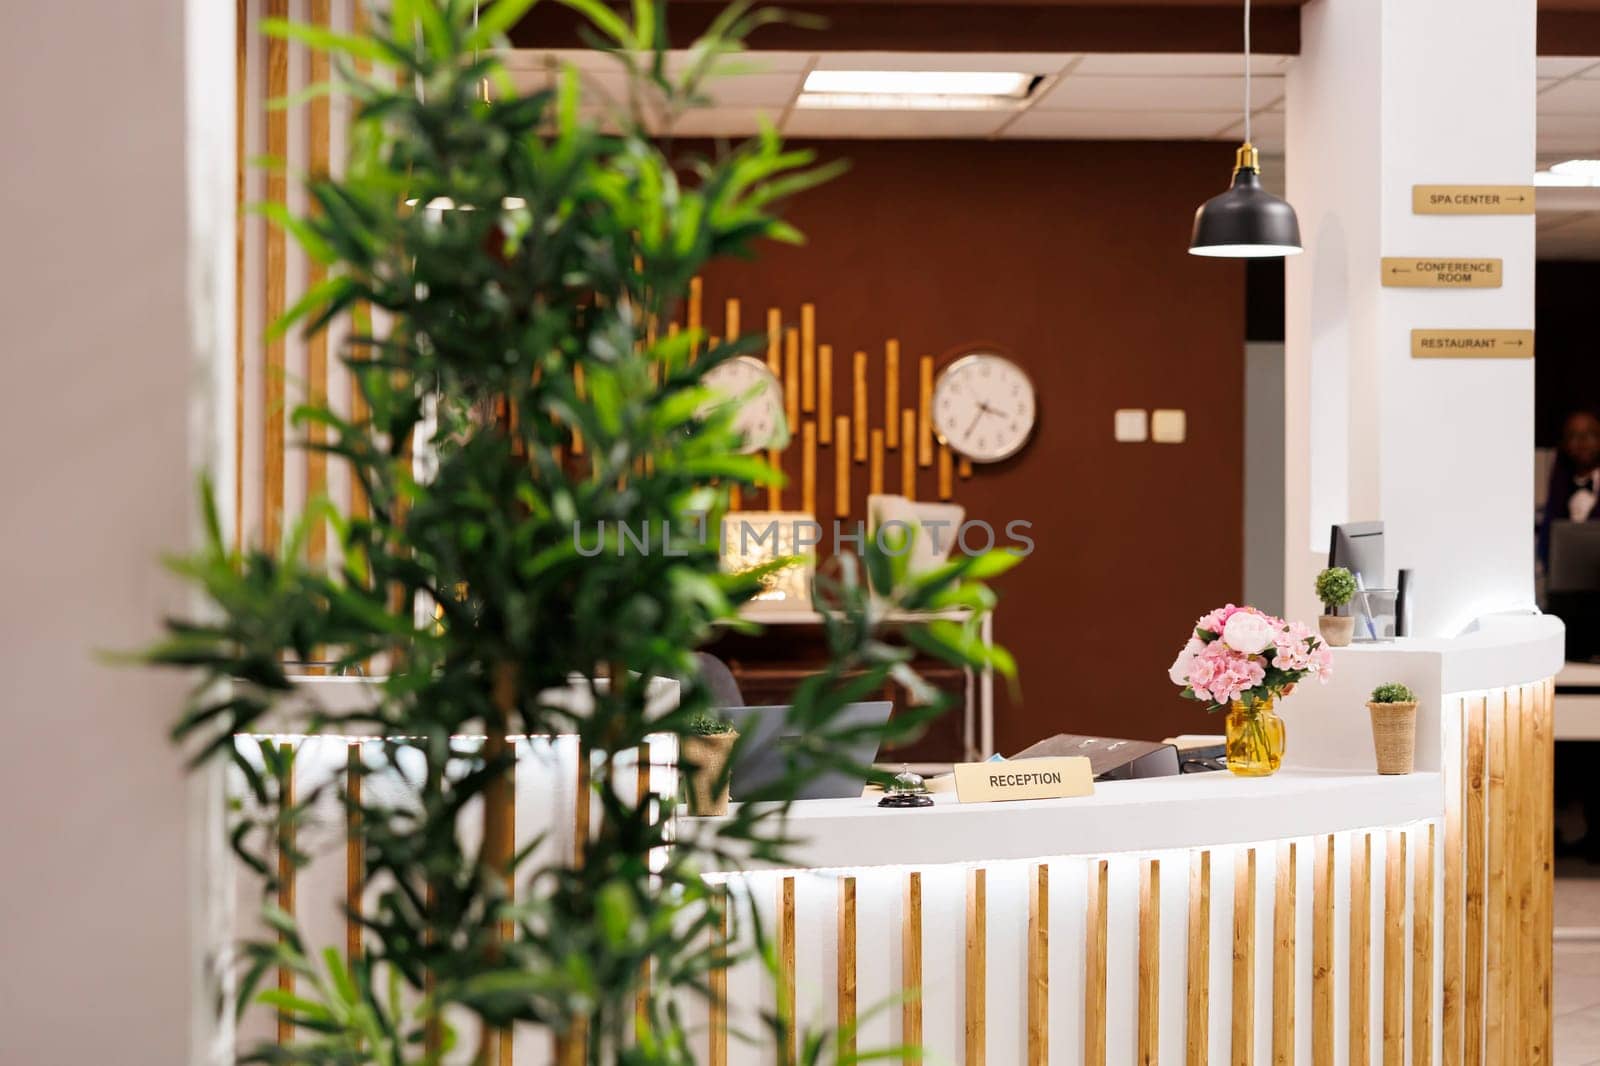 Hotel entrance area, stylish modern reception counter with front desk with row of clocks with different time zones hanging on wall, nobody. Hospitality interior design concept